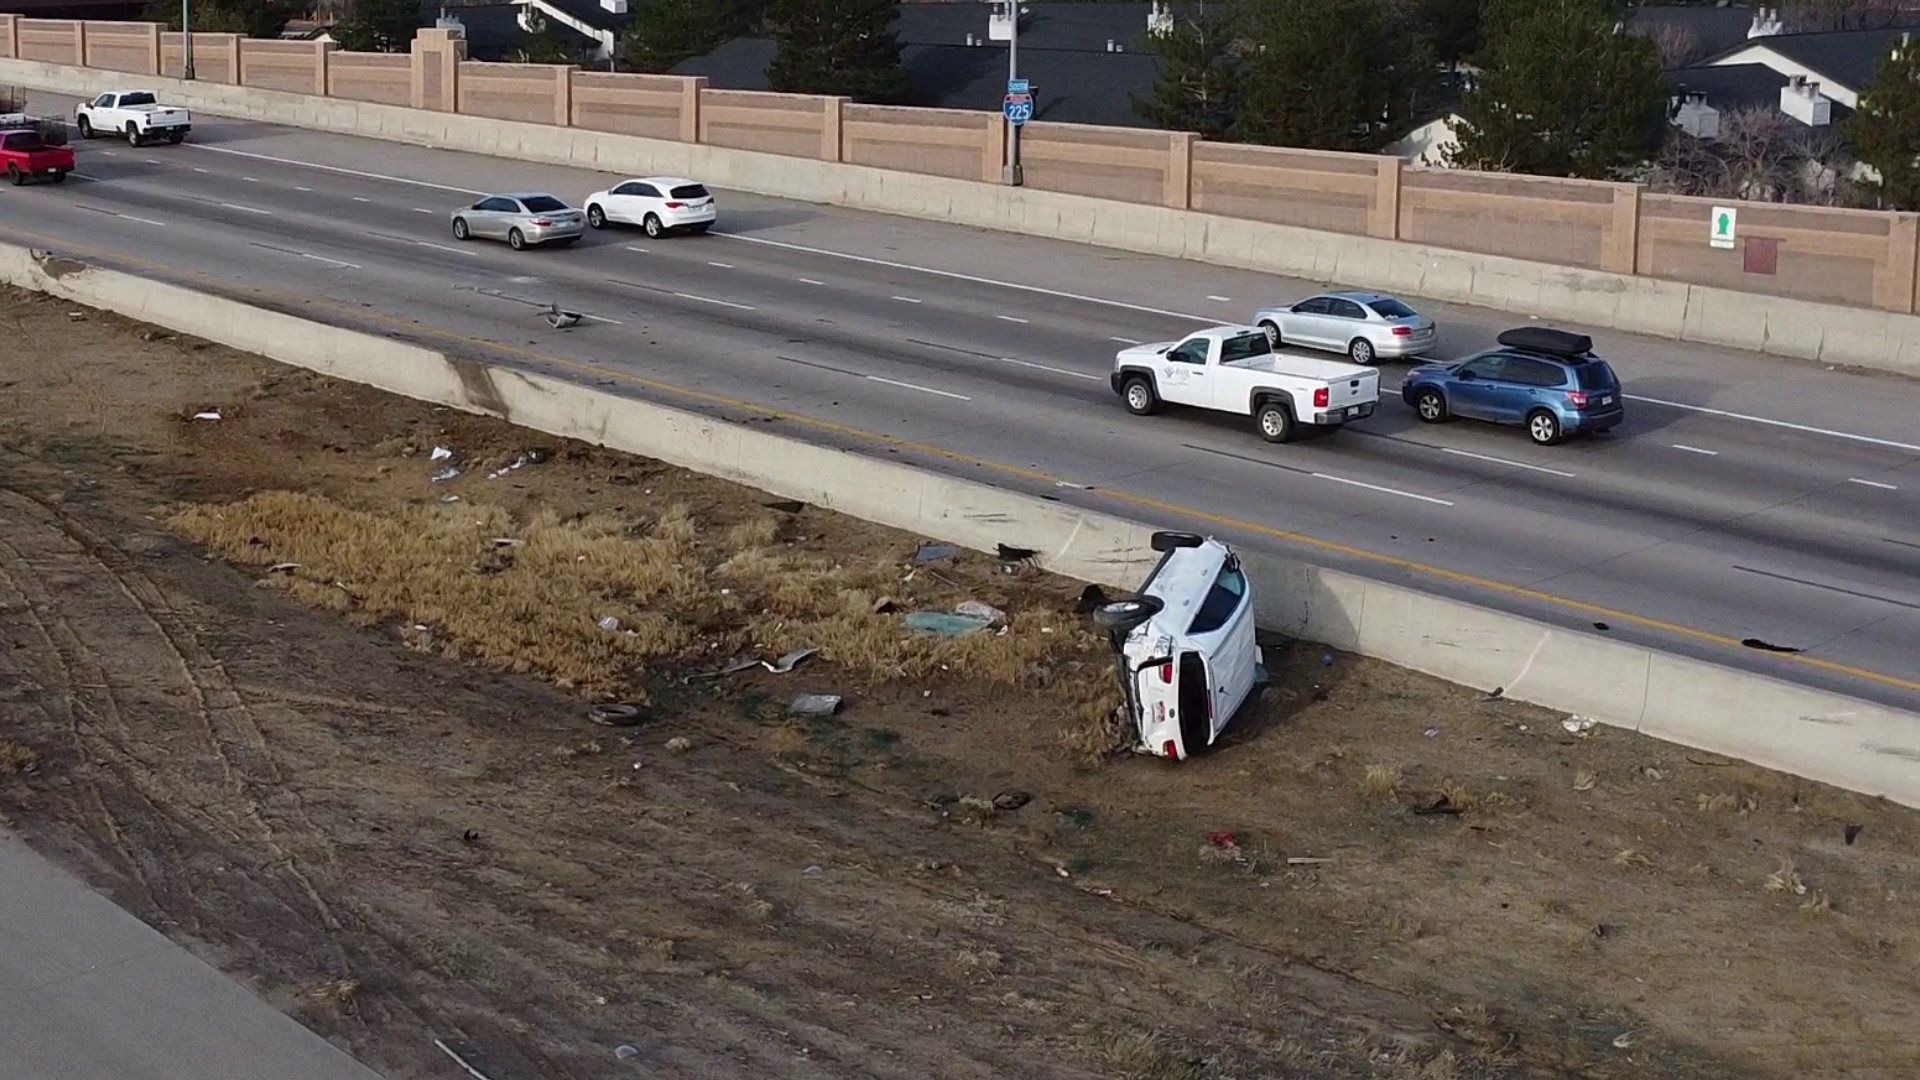 A viewer sent drone footage of the scene after five teens were ejected from a stolen car on I-225, according to Aurora Police.